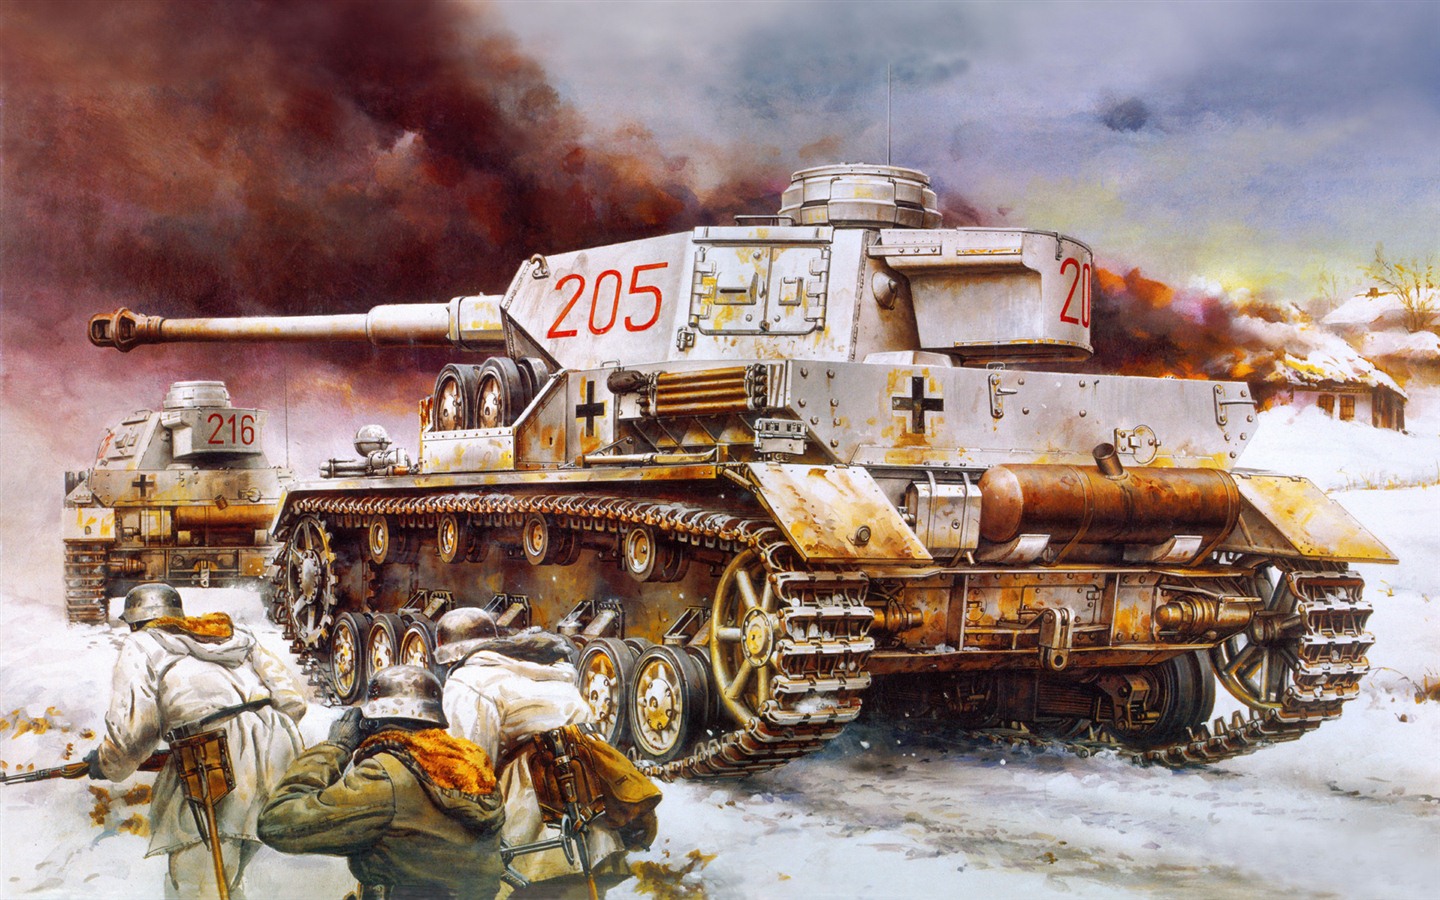 Military tanks, armored HD painting wallpapers #15 - 1440x900